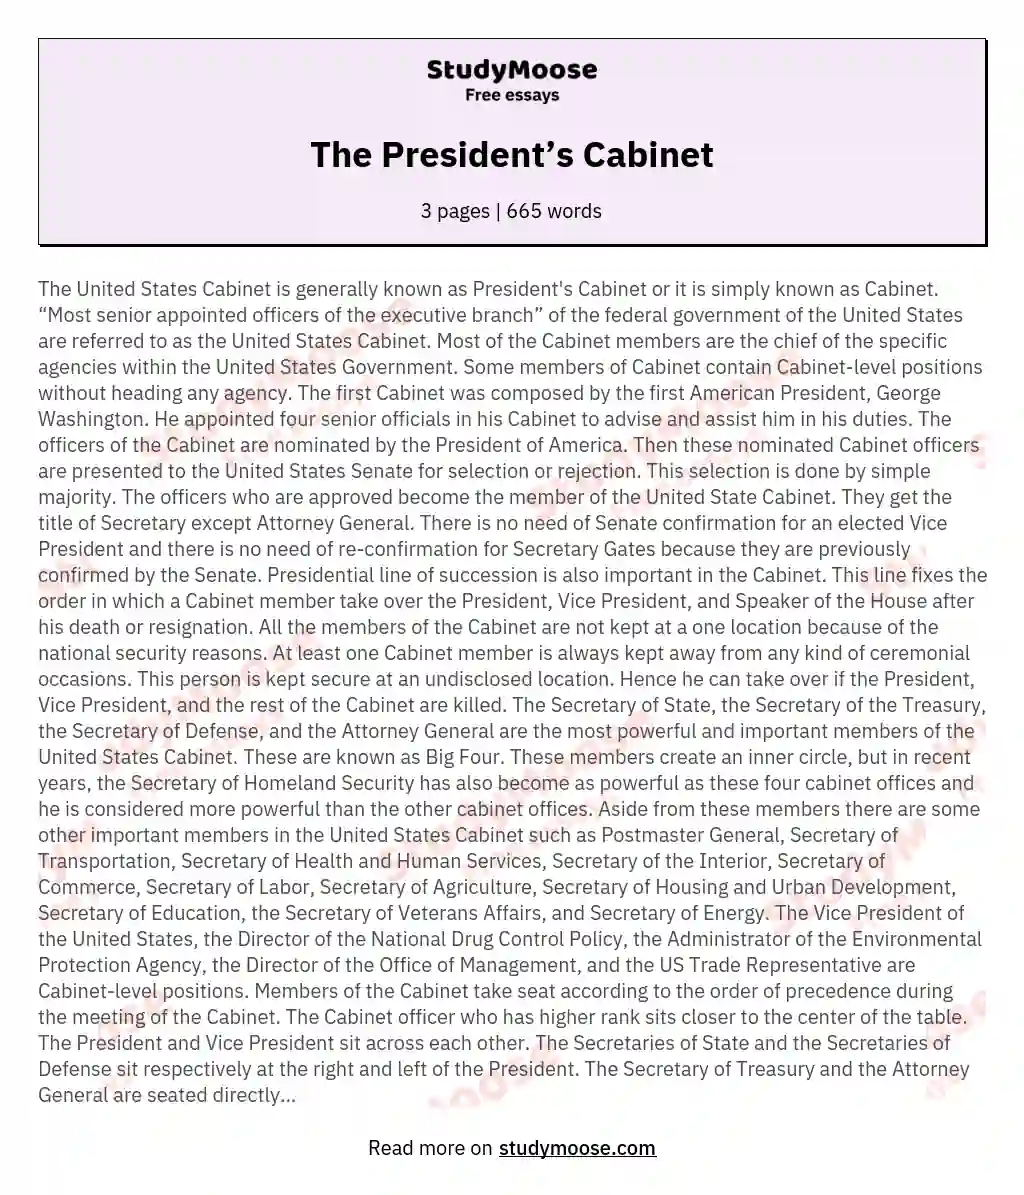 The President’s Cabinet essay